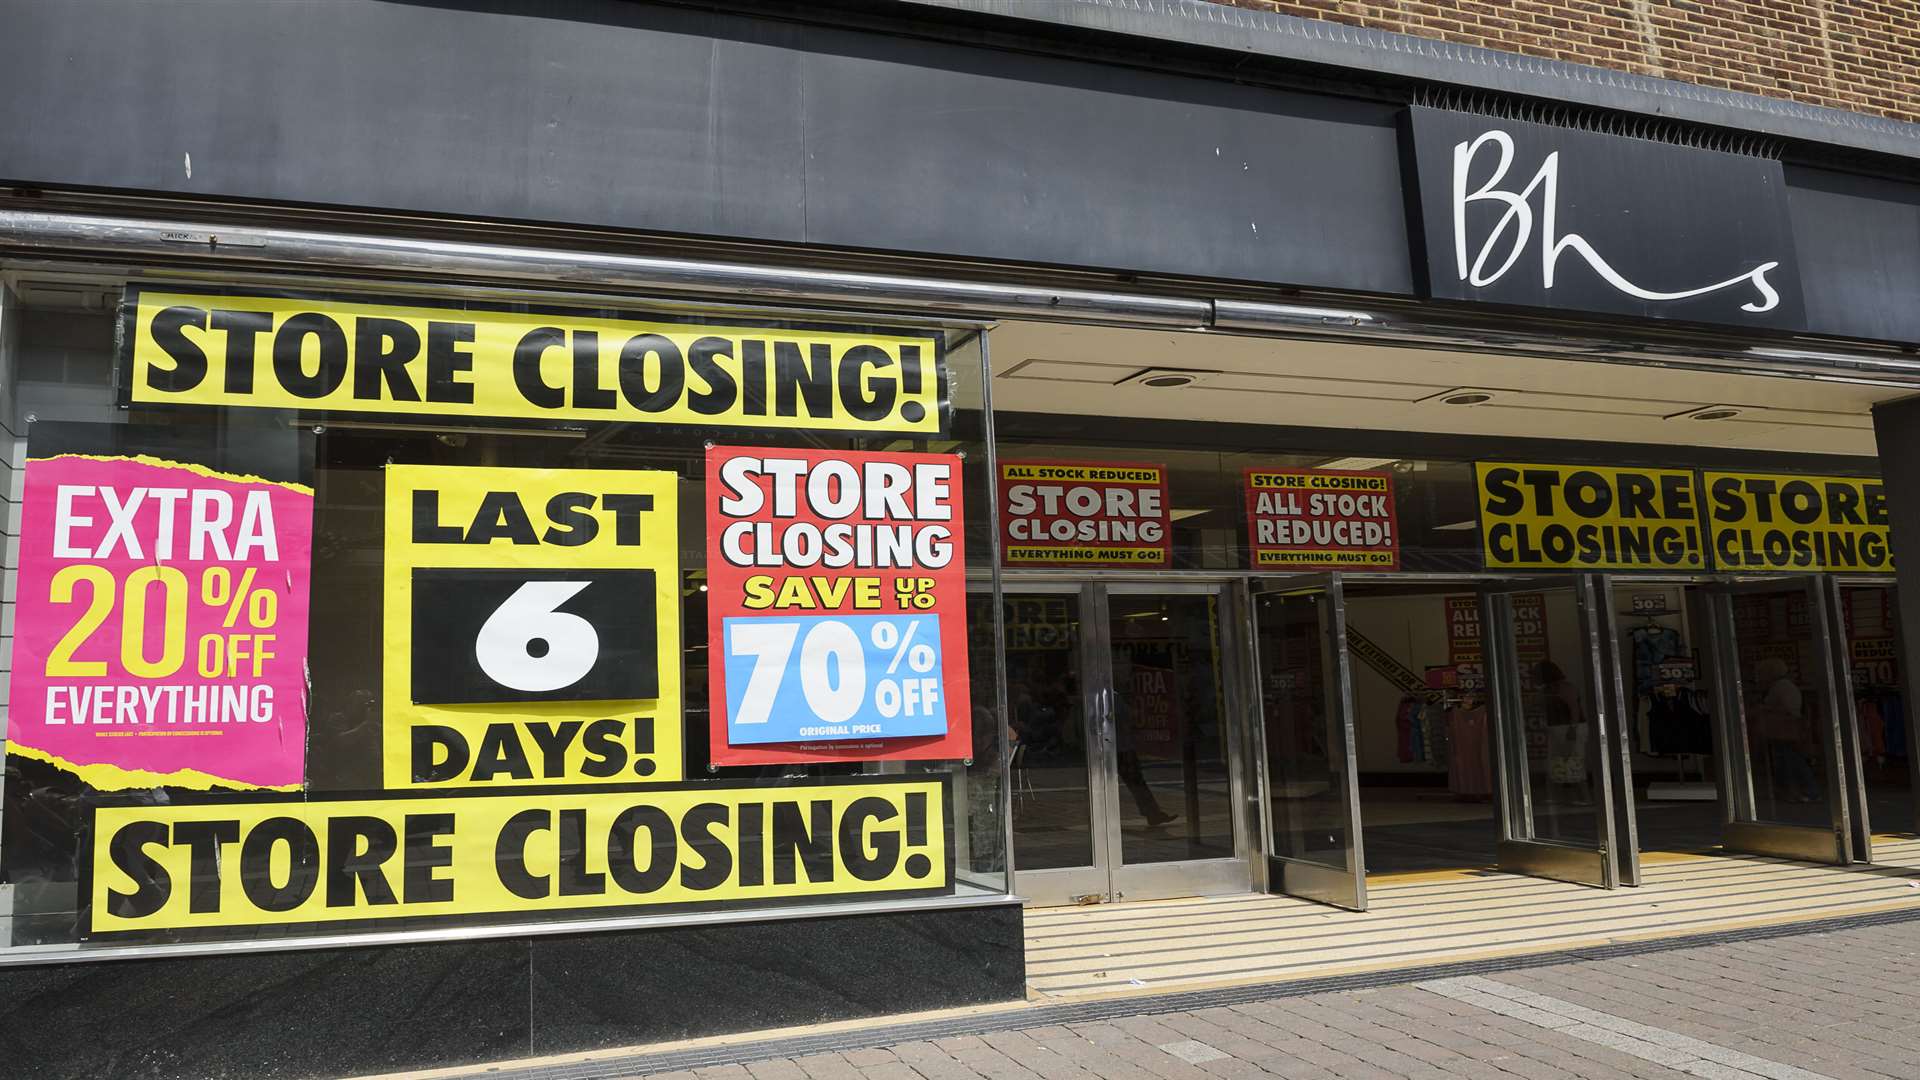 Store closing notices in the window of BHS.